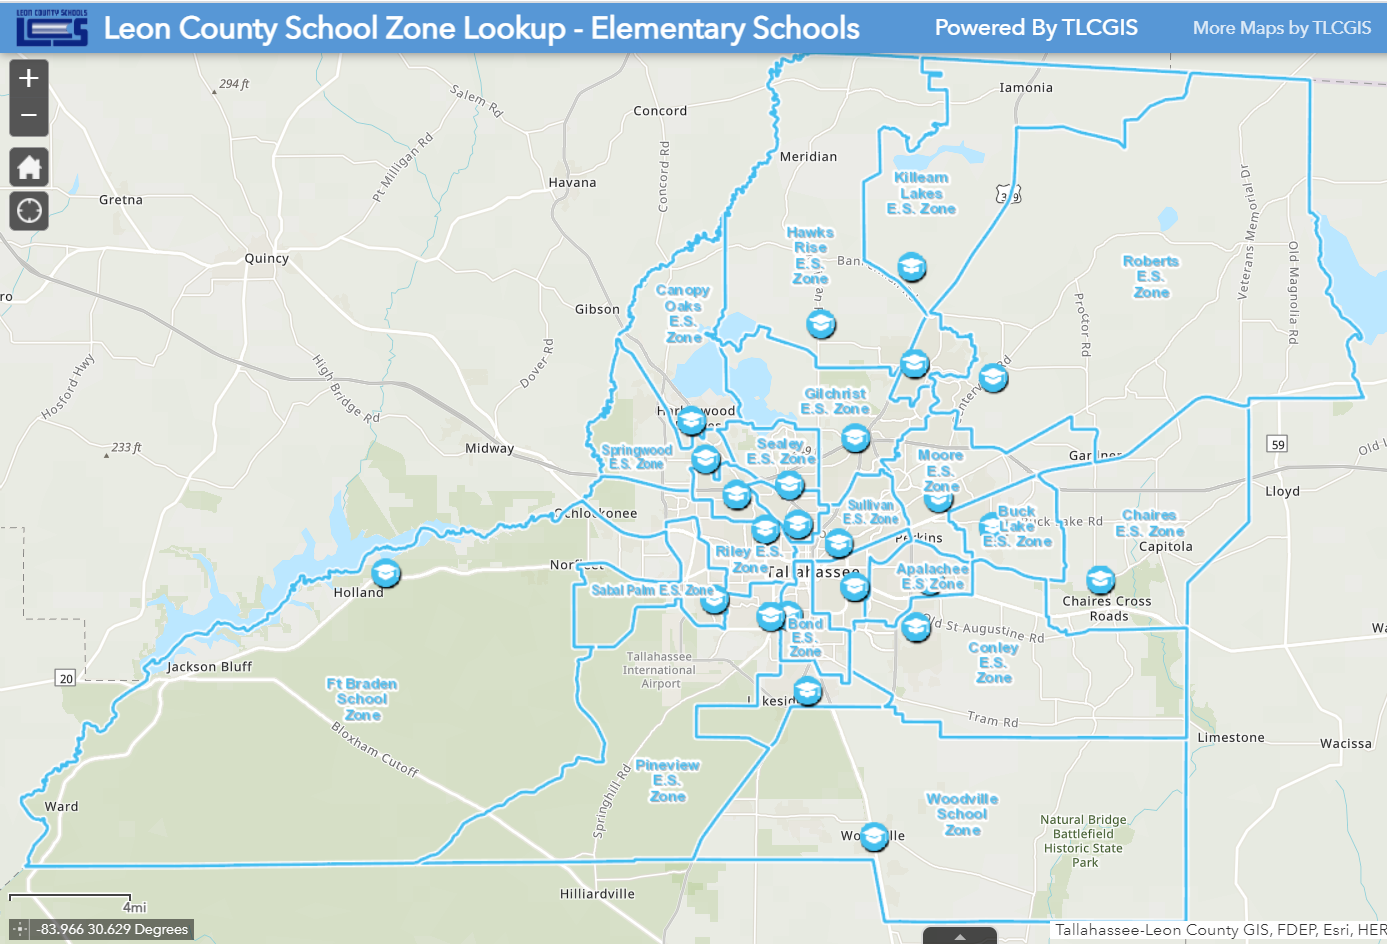 Map of the areas included in the elementary schools